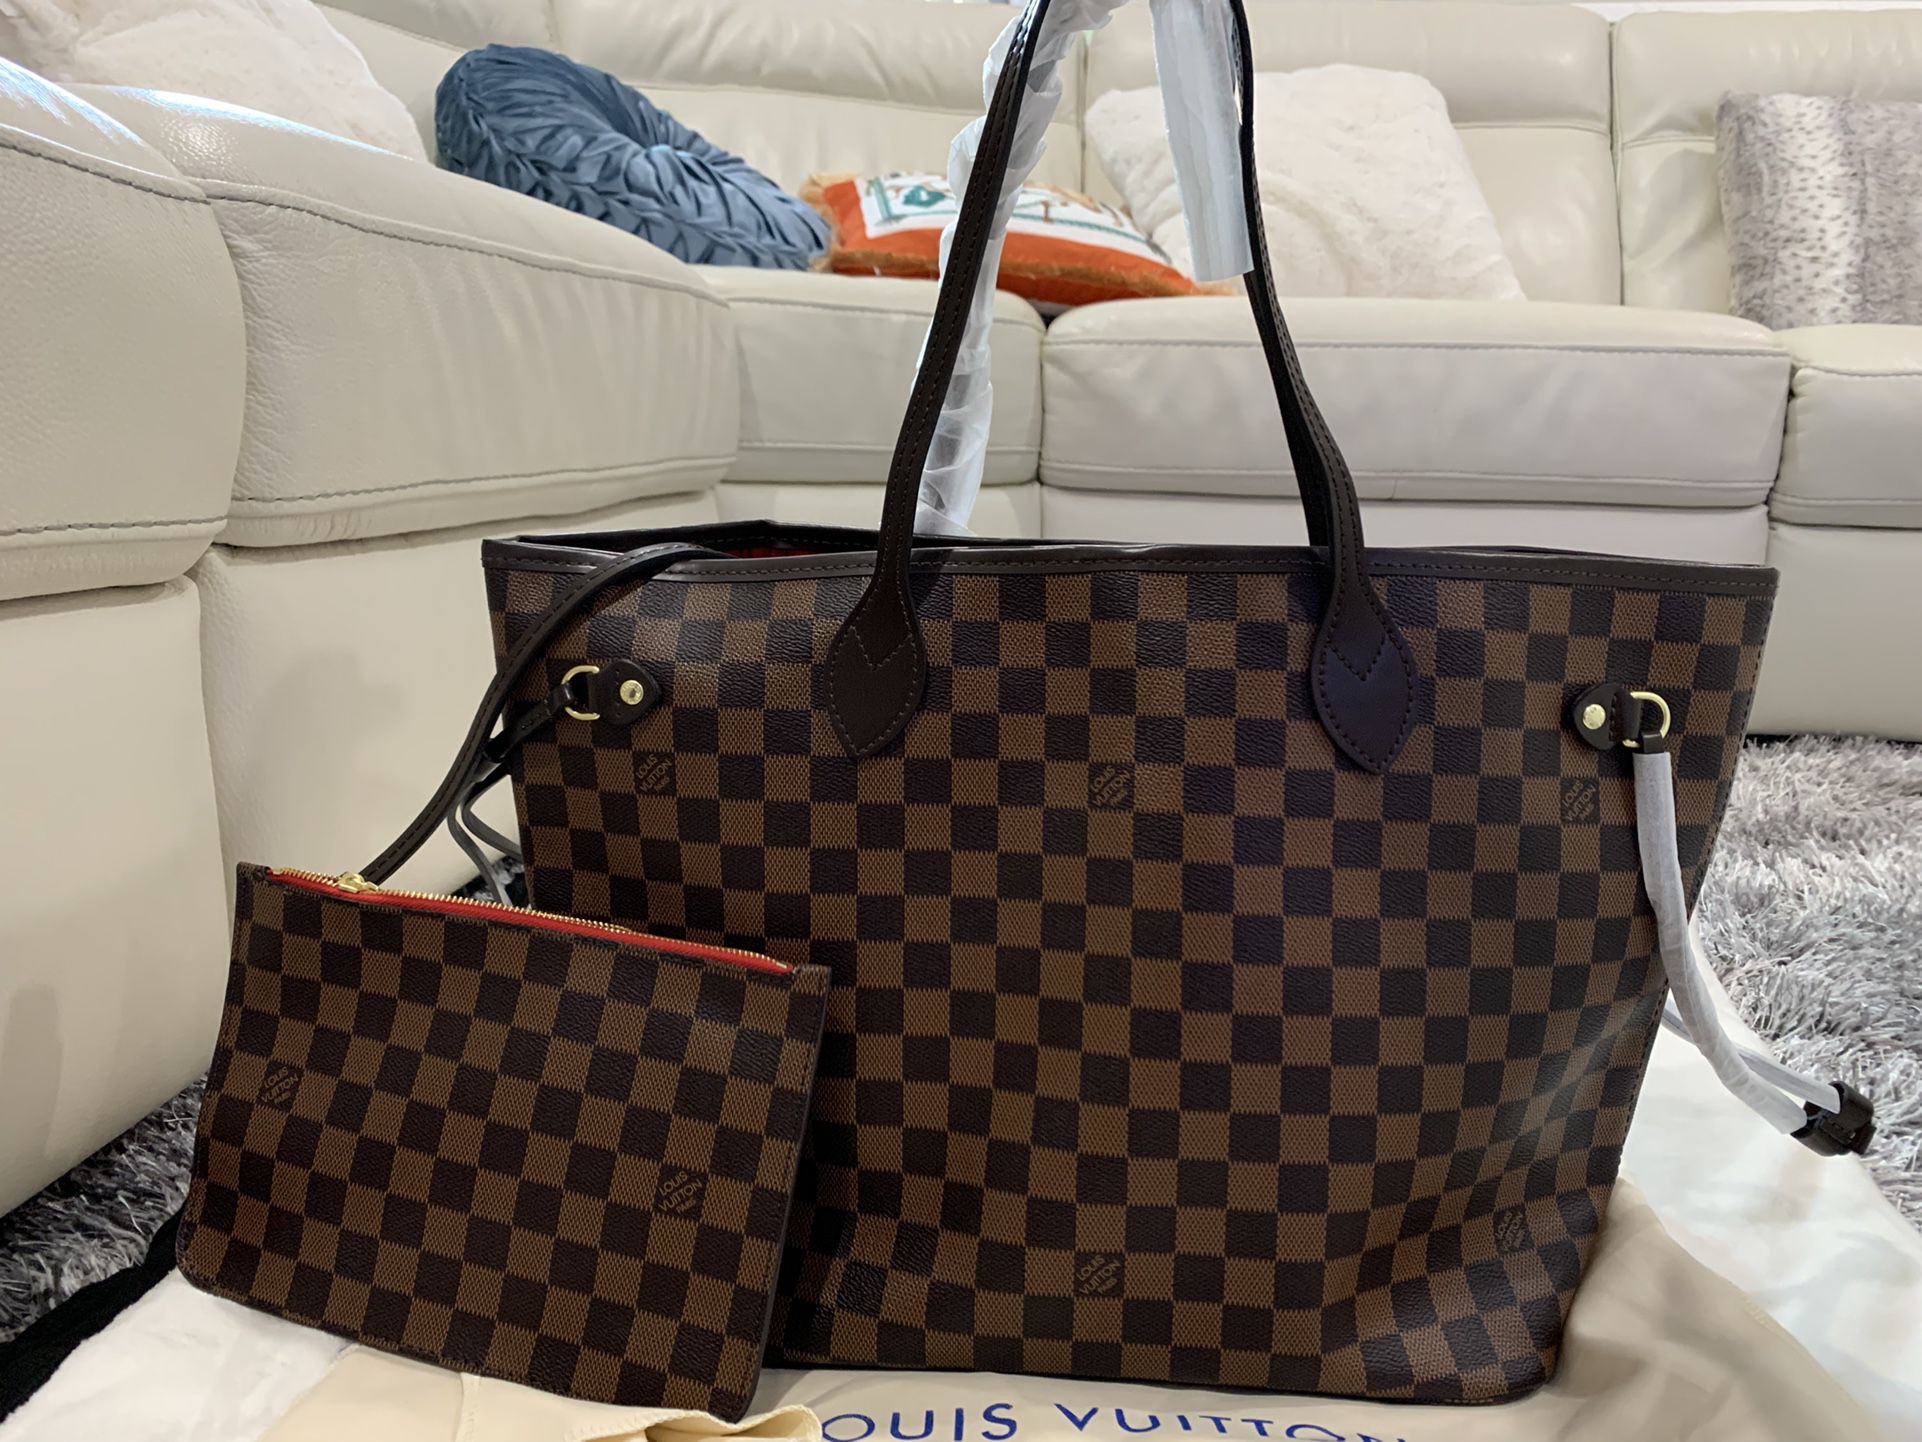 Brand New Neverfull Damier Azur With Wristlet for Sale in Kent, WA